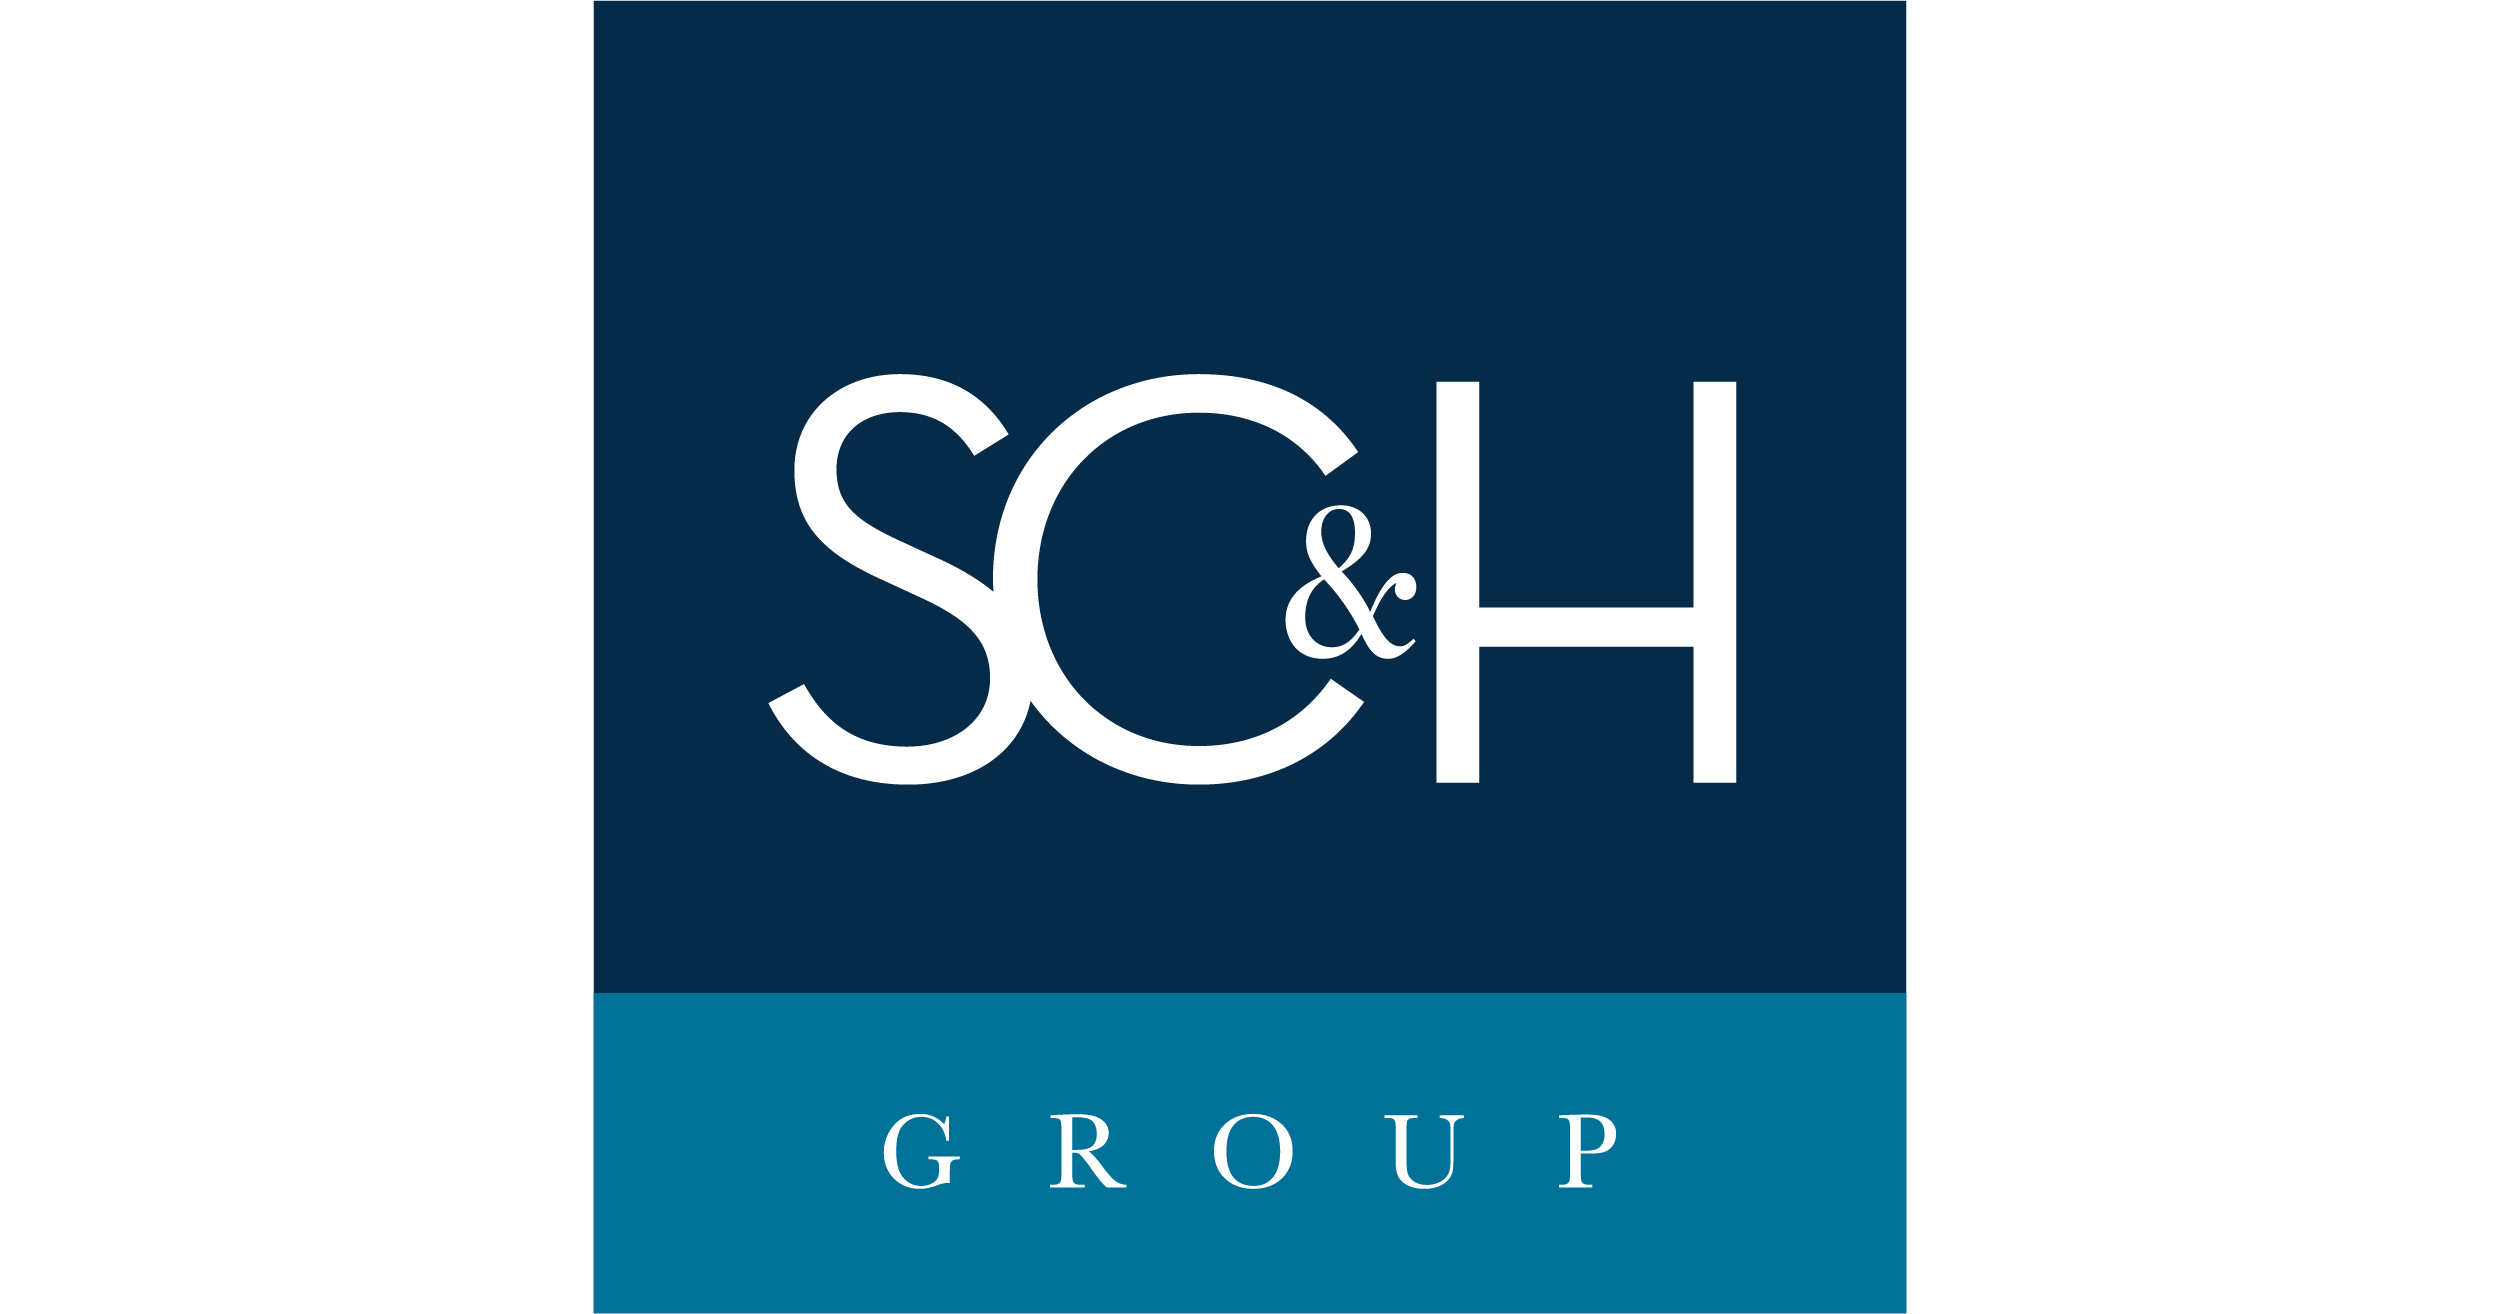 SCH Logo - SC&H Group Inc. | Management Consulting, Audit & Tax Firm